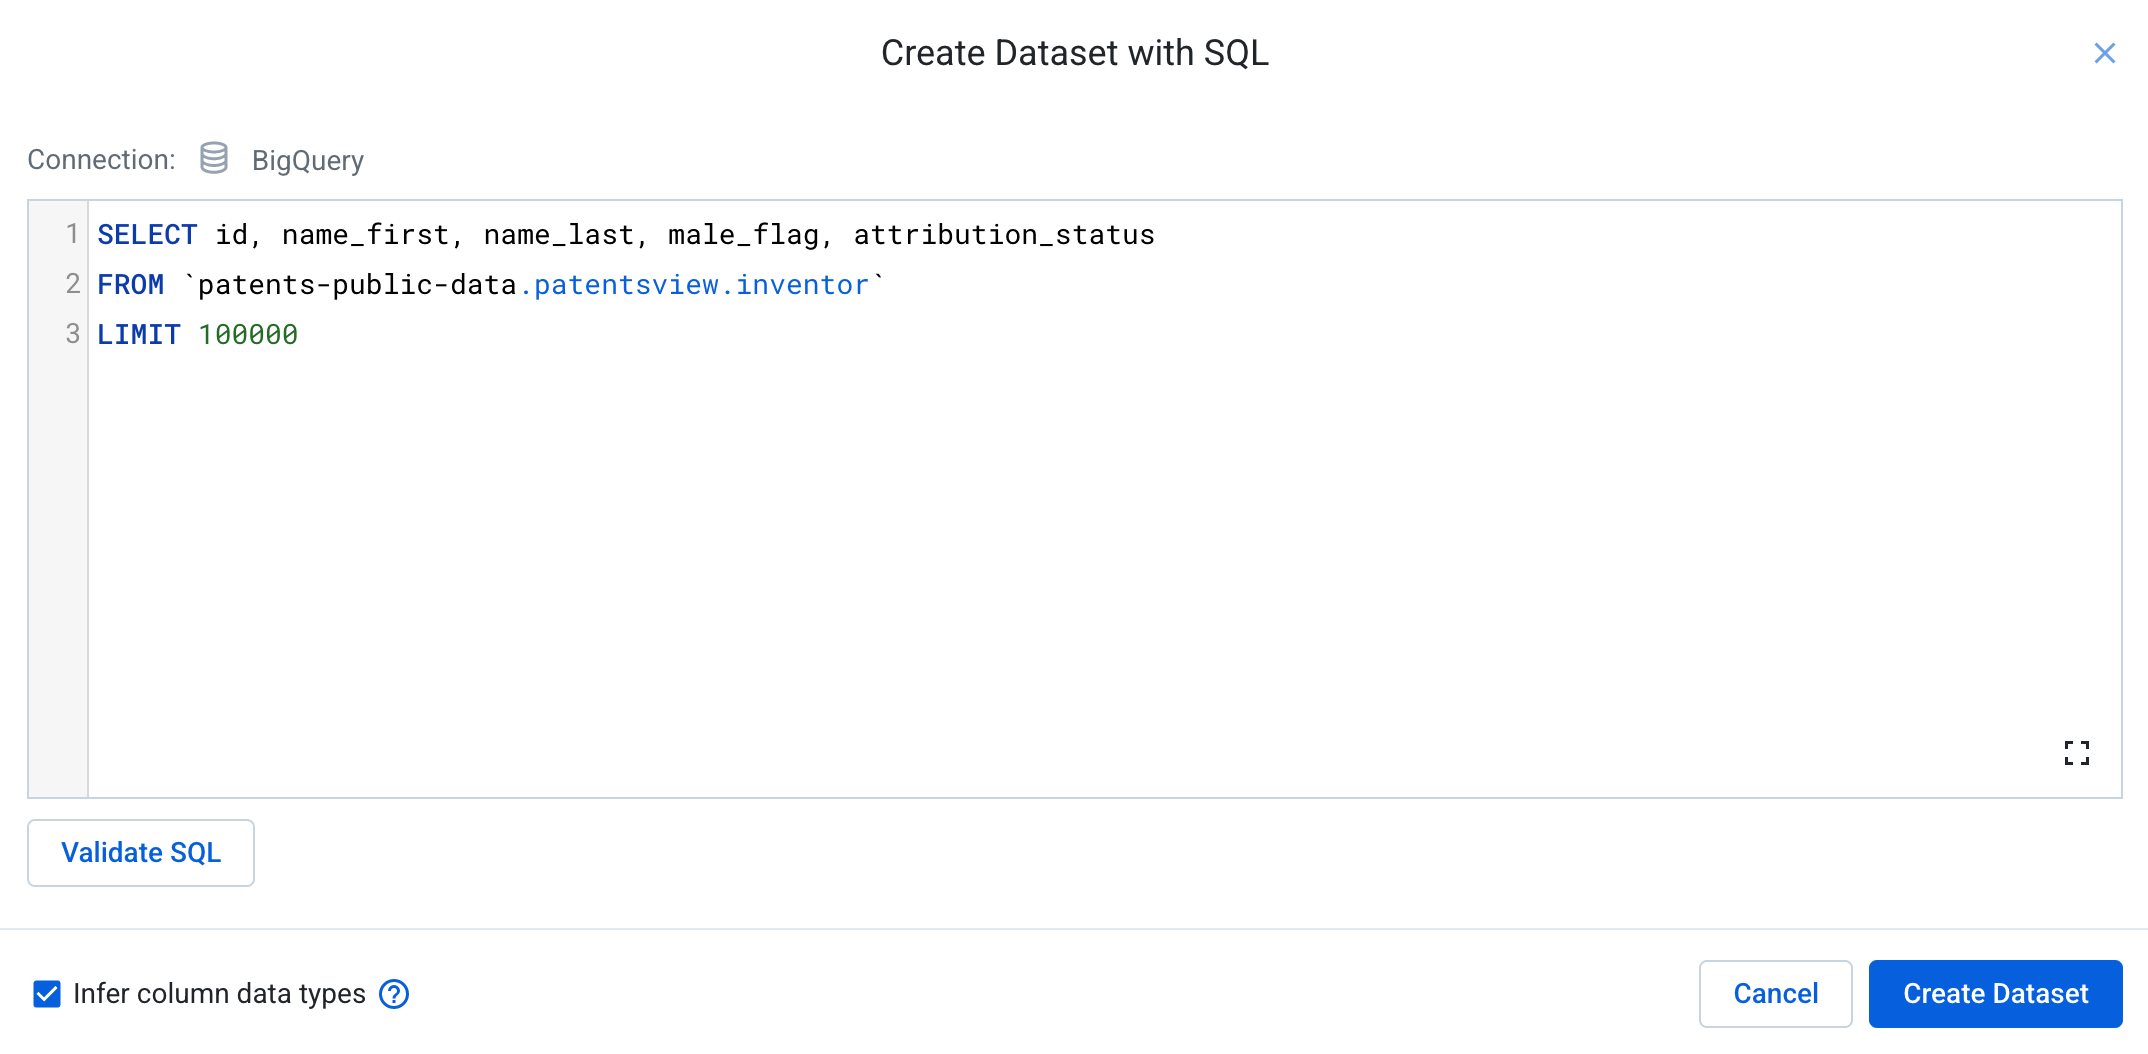 Create Dataset with SQL query dialog box displaying validated SQL statement